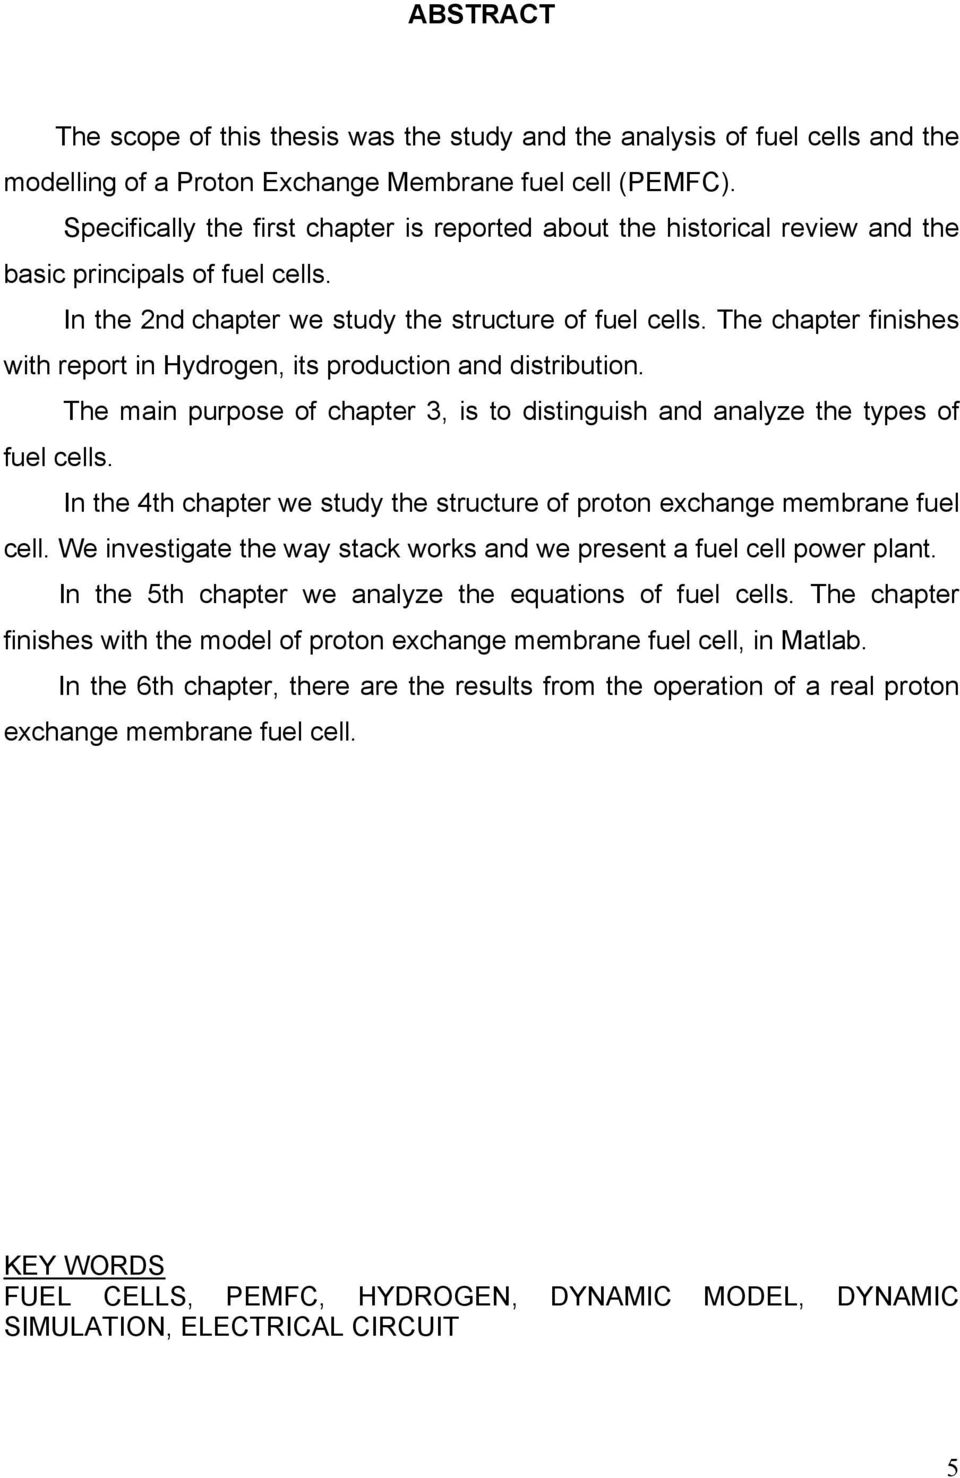 The chapter finishes with report in Hydrogen, its production and distribution. The main purpose of chapter 3, is to distinguish and analyze the types of fuel cells.